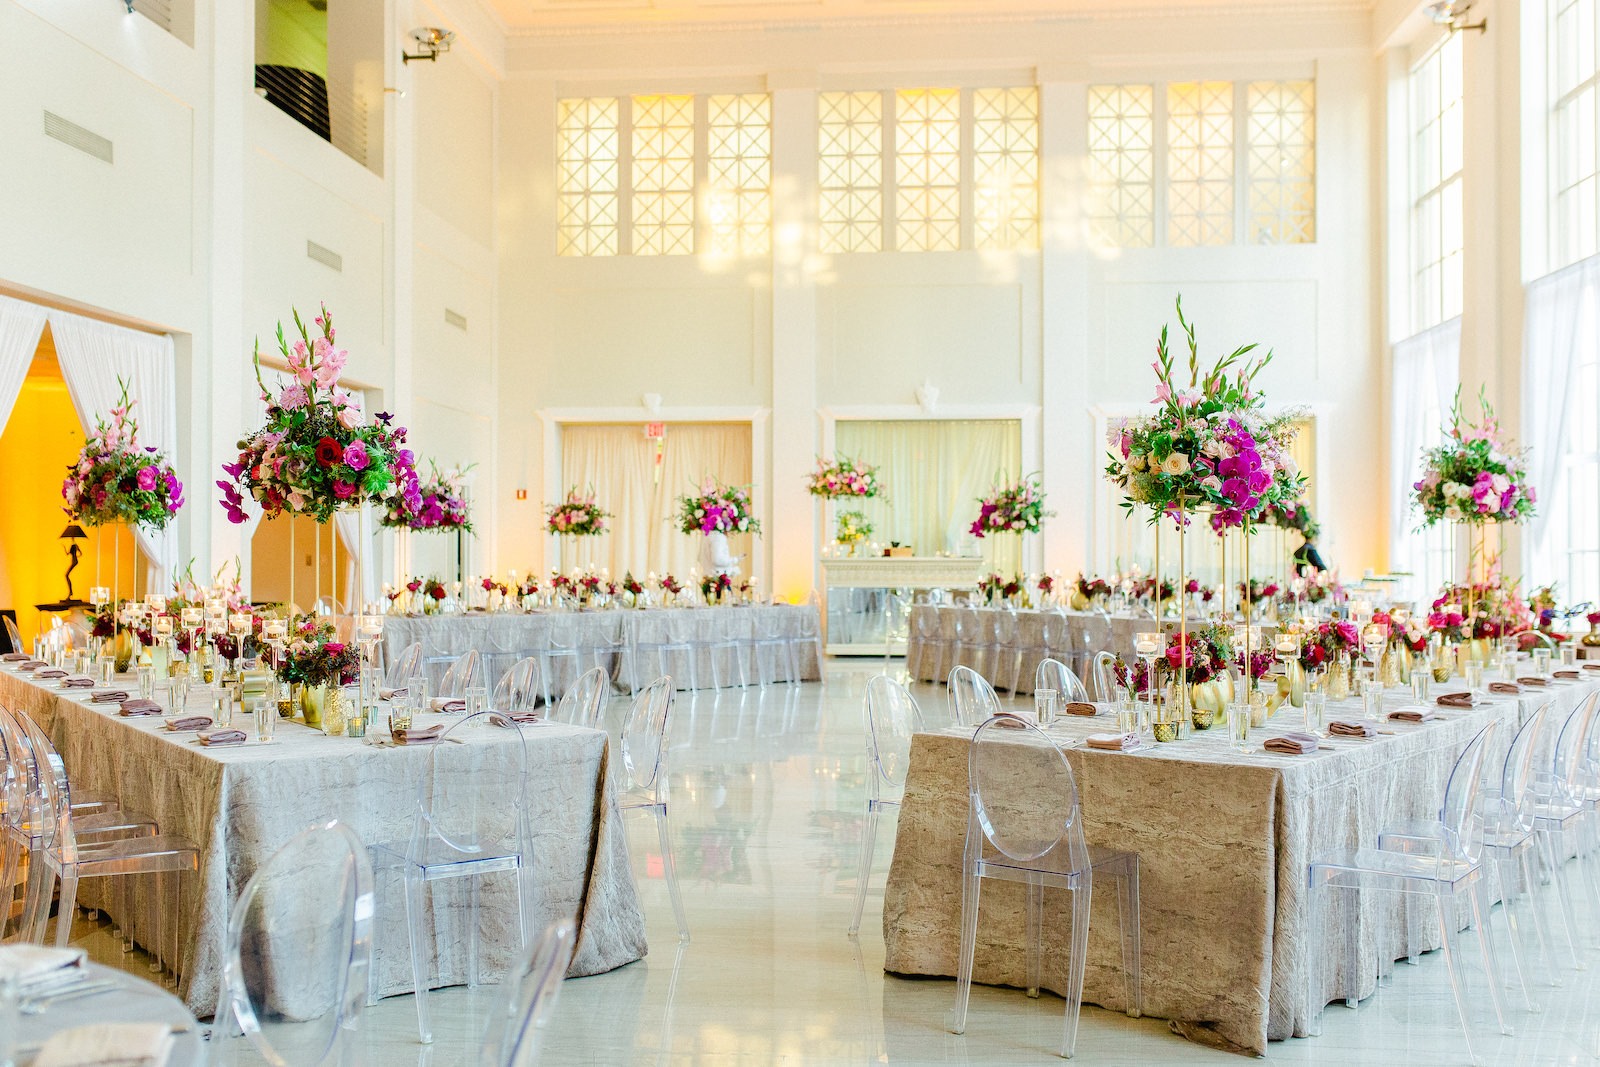 Colorful Luxury Indoor Wedding Reception at Tampa Wedding Venue The Vault | Feasting Tables with Ghost Chairs and Tall Centerpieces of Pink Gladiolas, Roses, Orchids and Greenery with Gold Bud Vases and Candles | Kate Ryan Event Rentals